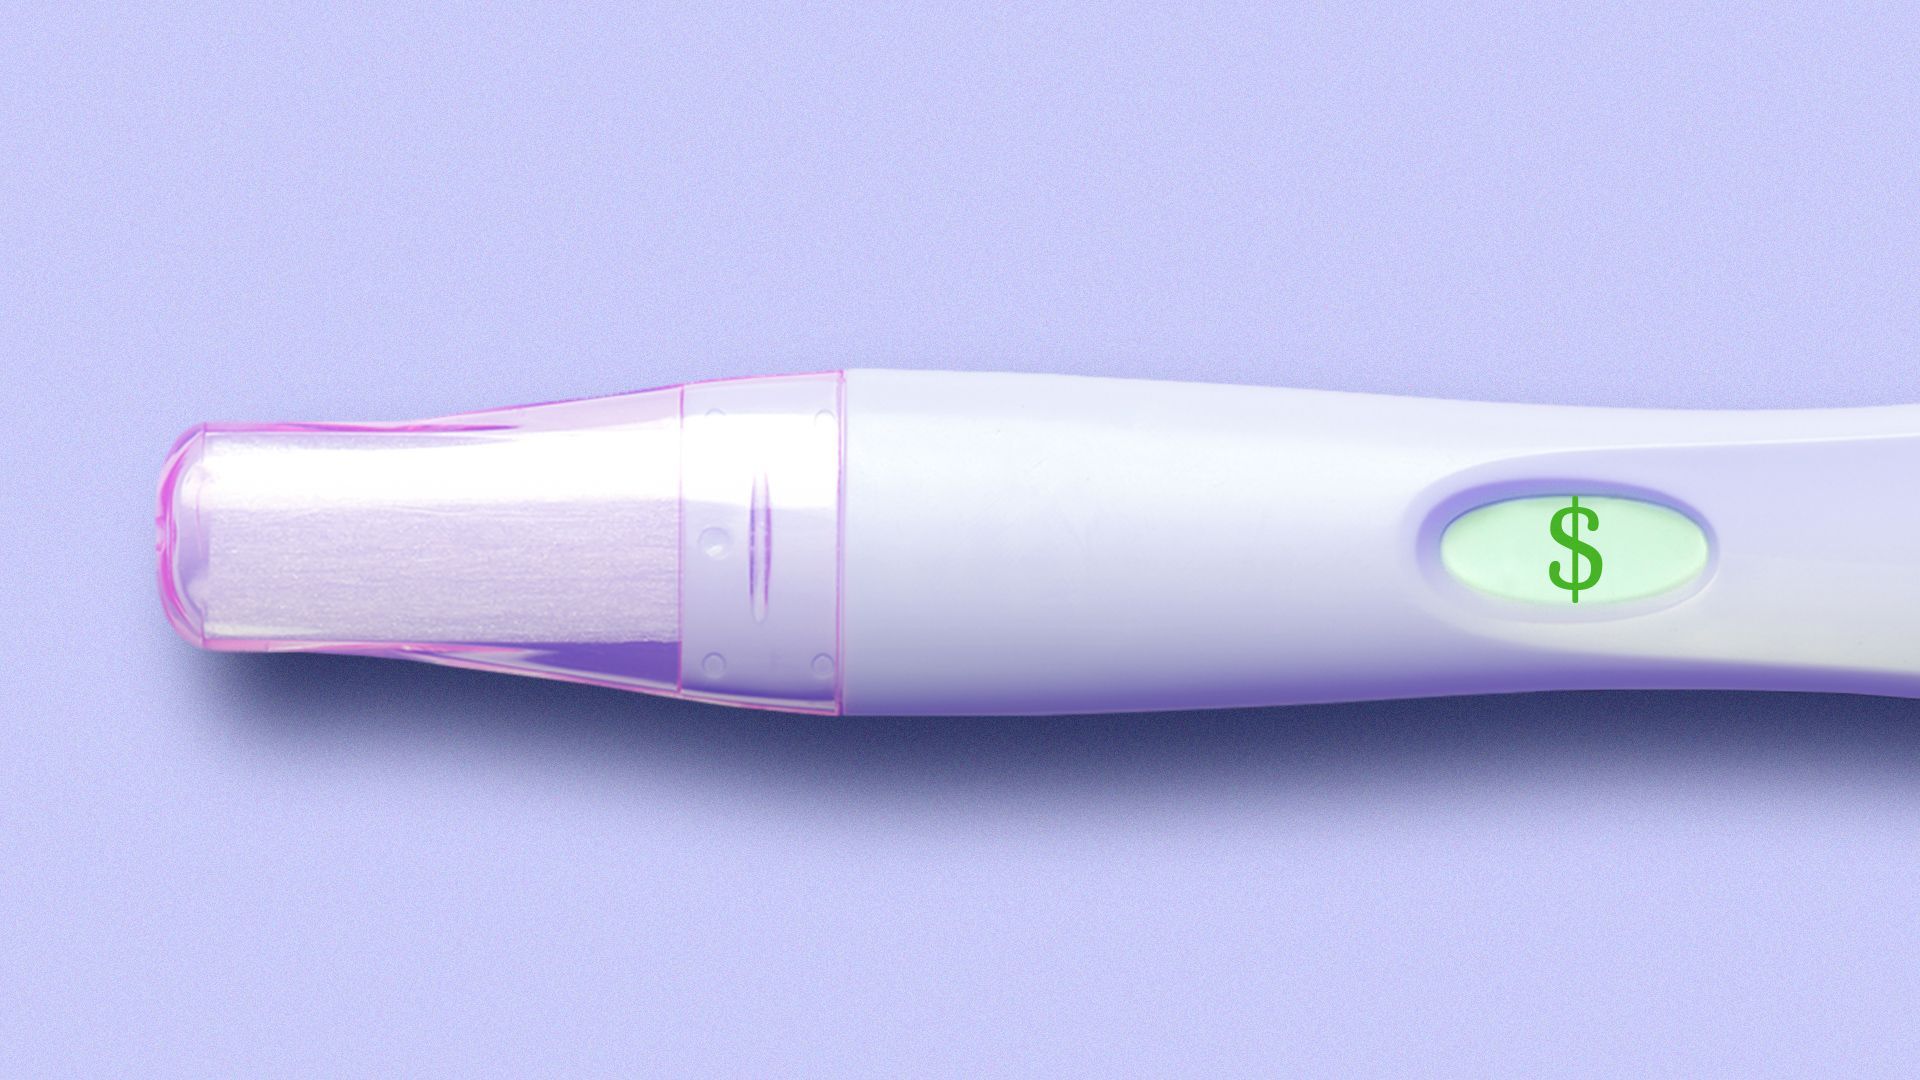 Illustration of a pregnancy test with a dollar sign appearing on the screen.